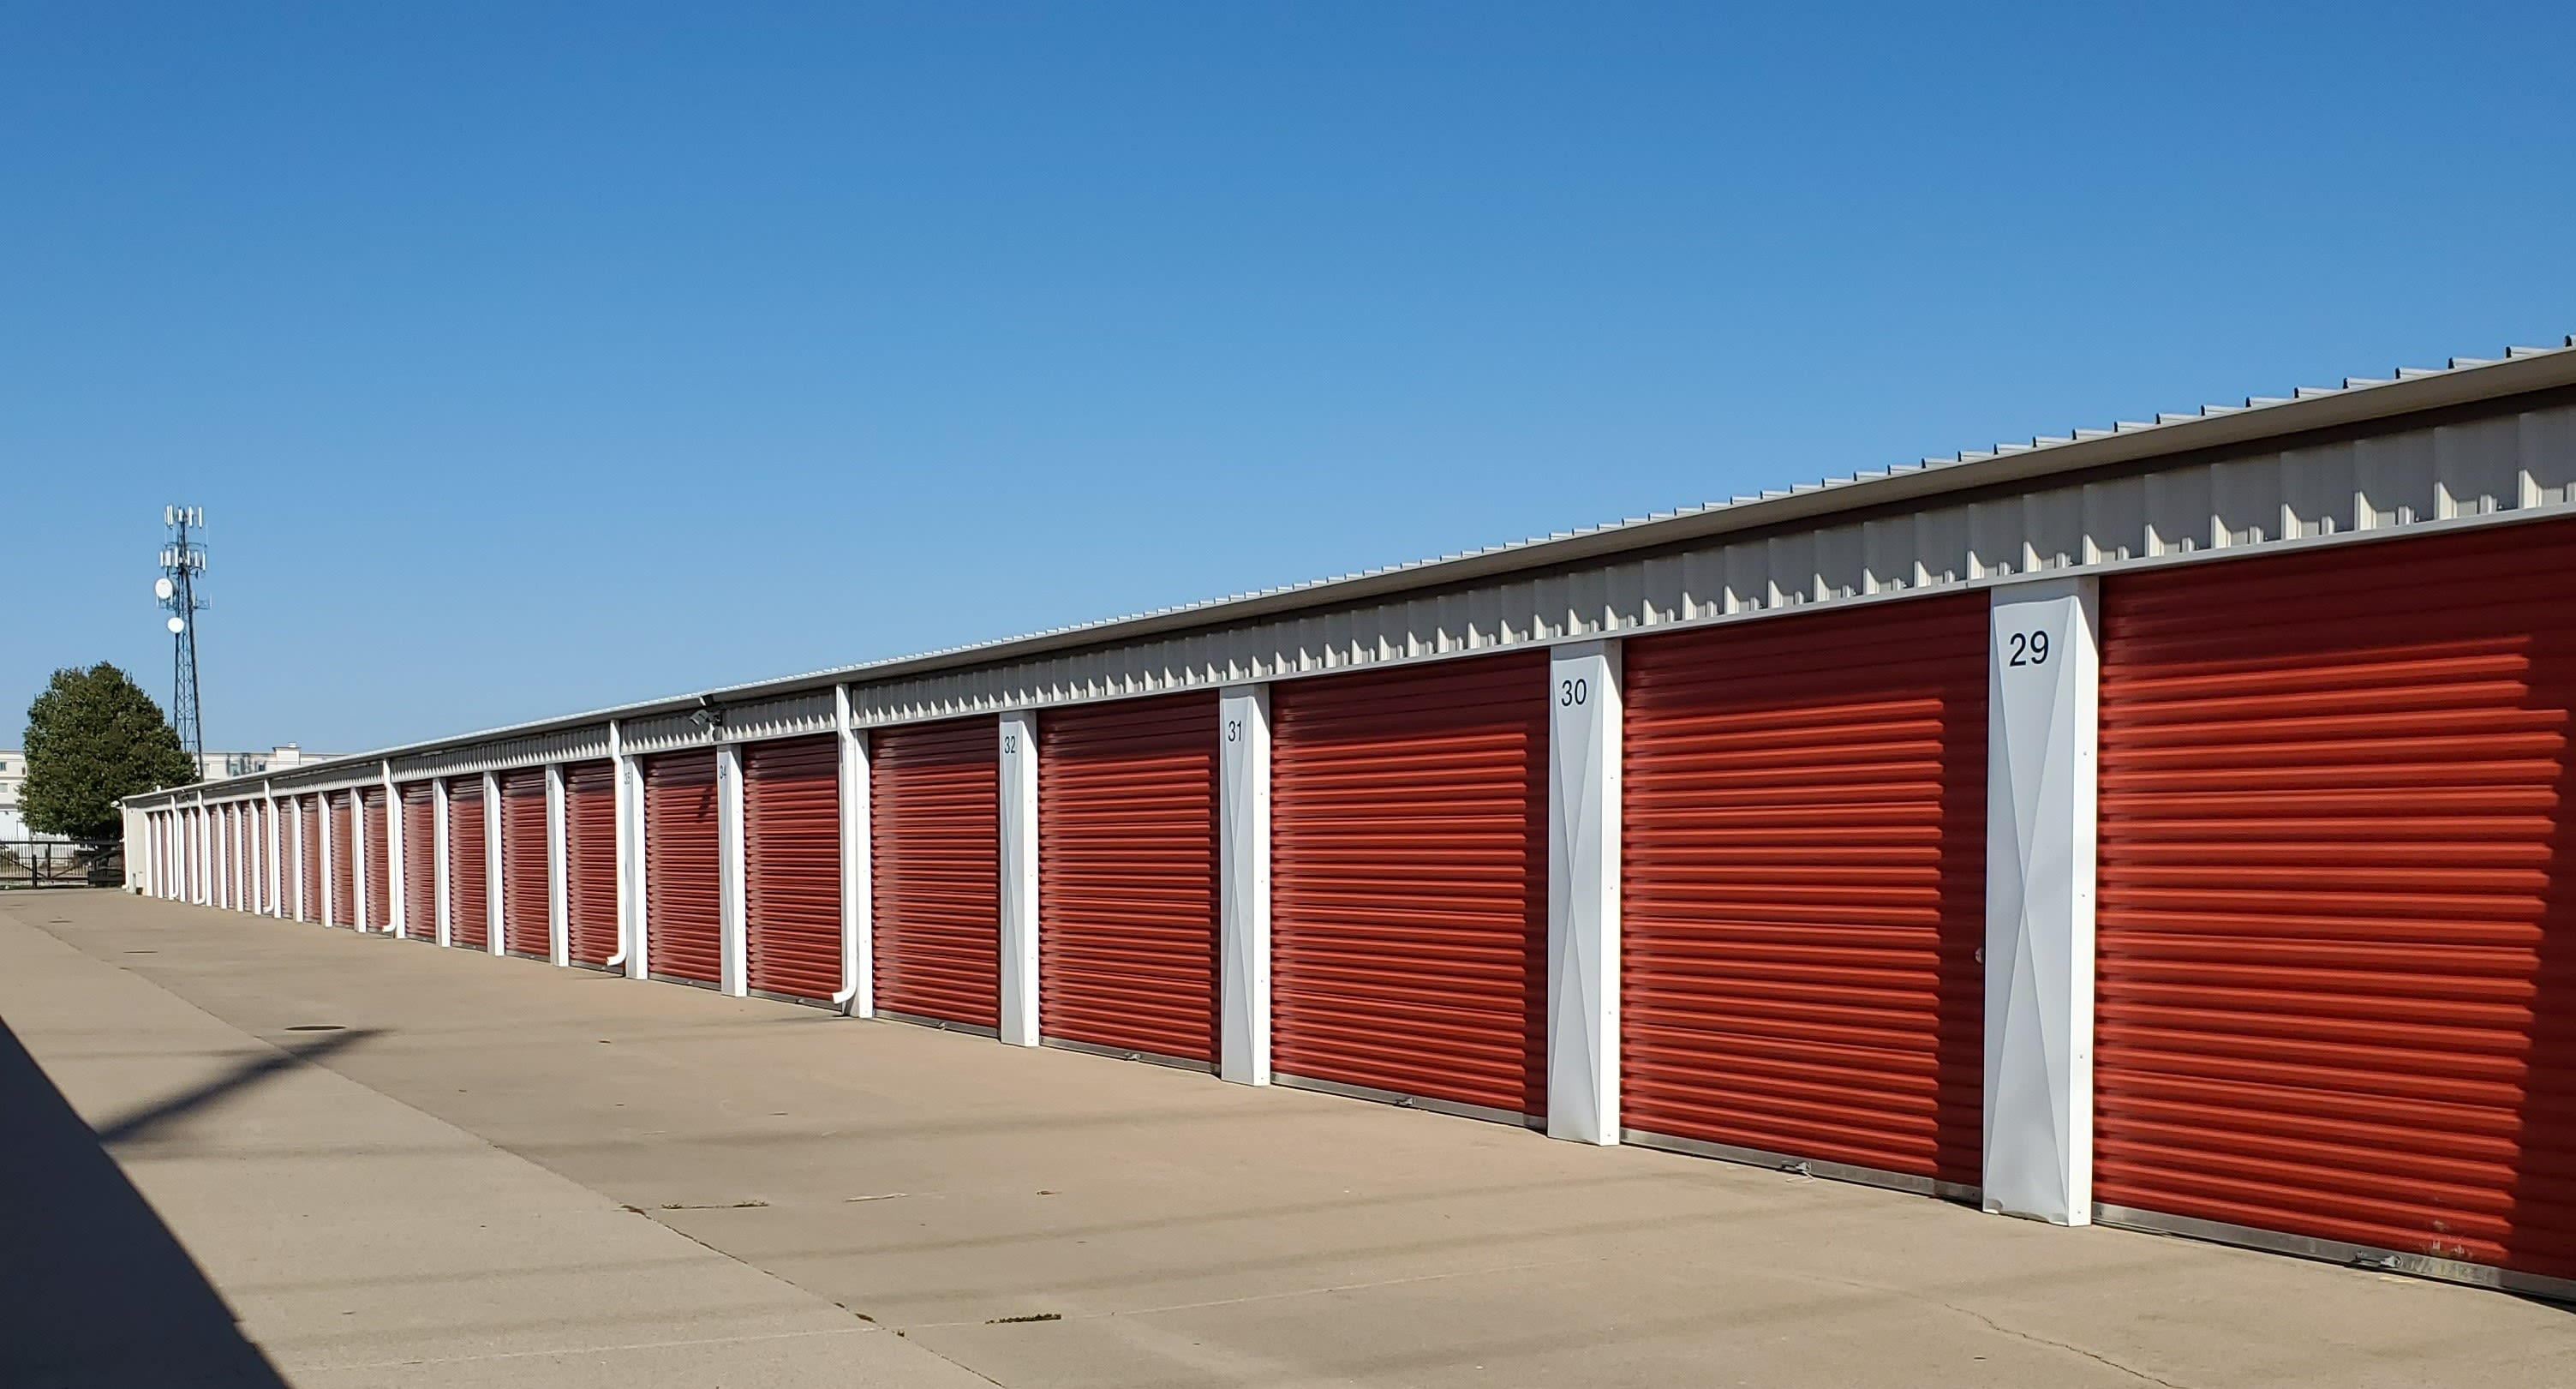 Learn more about features at KO Storage in Salina, Kansas